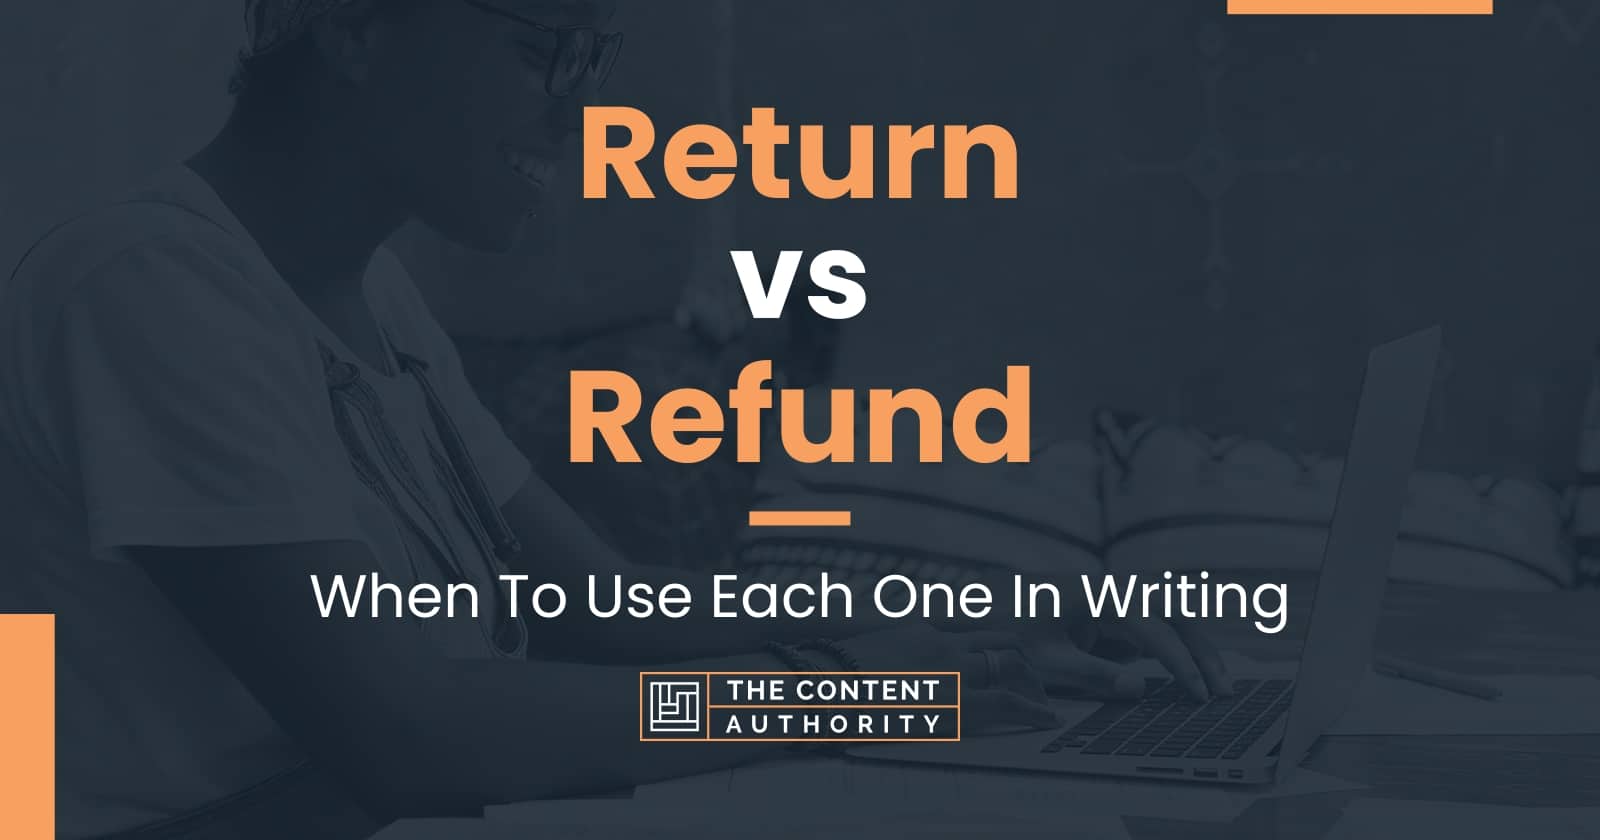 return-vs-refund-when-to-use-each-one-in-writing